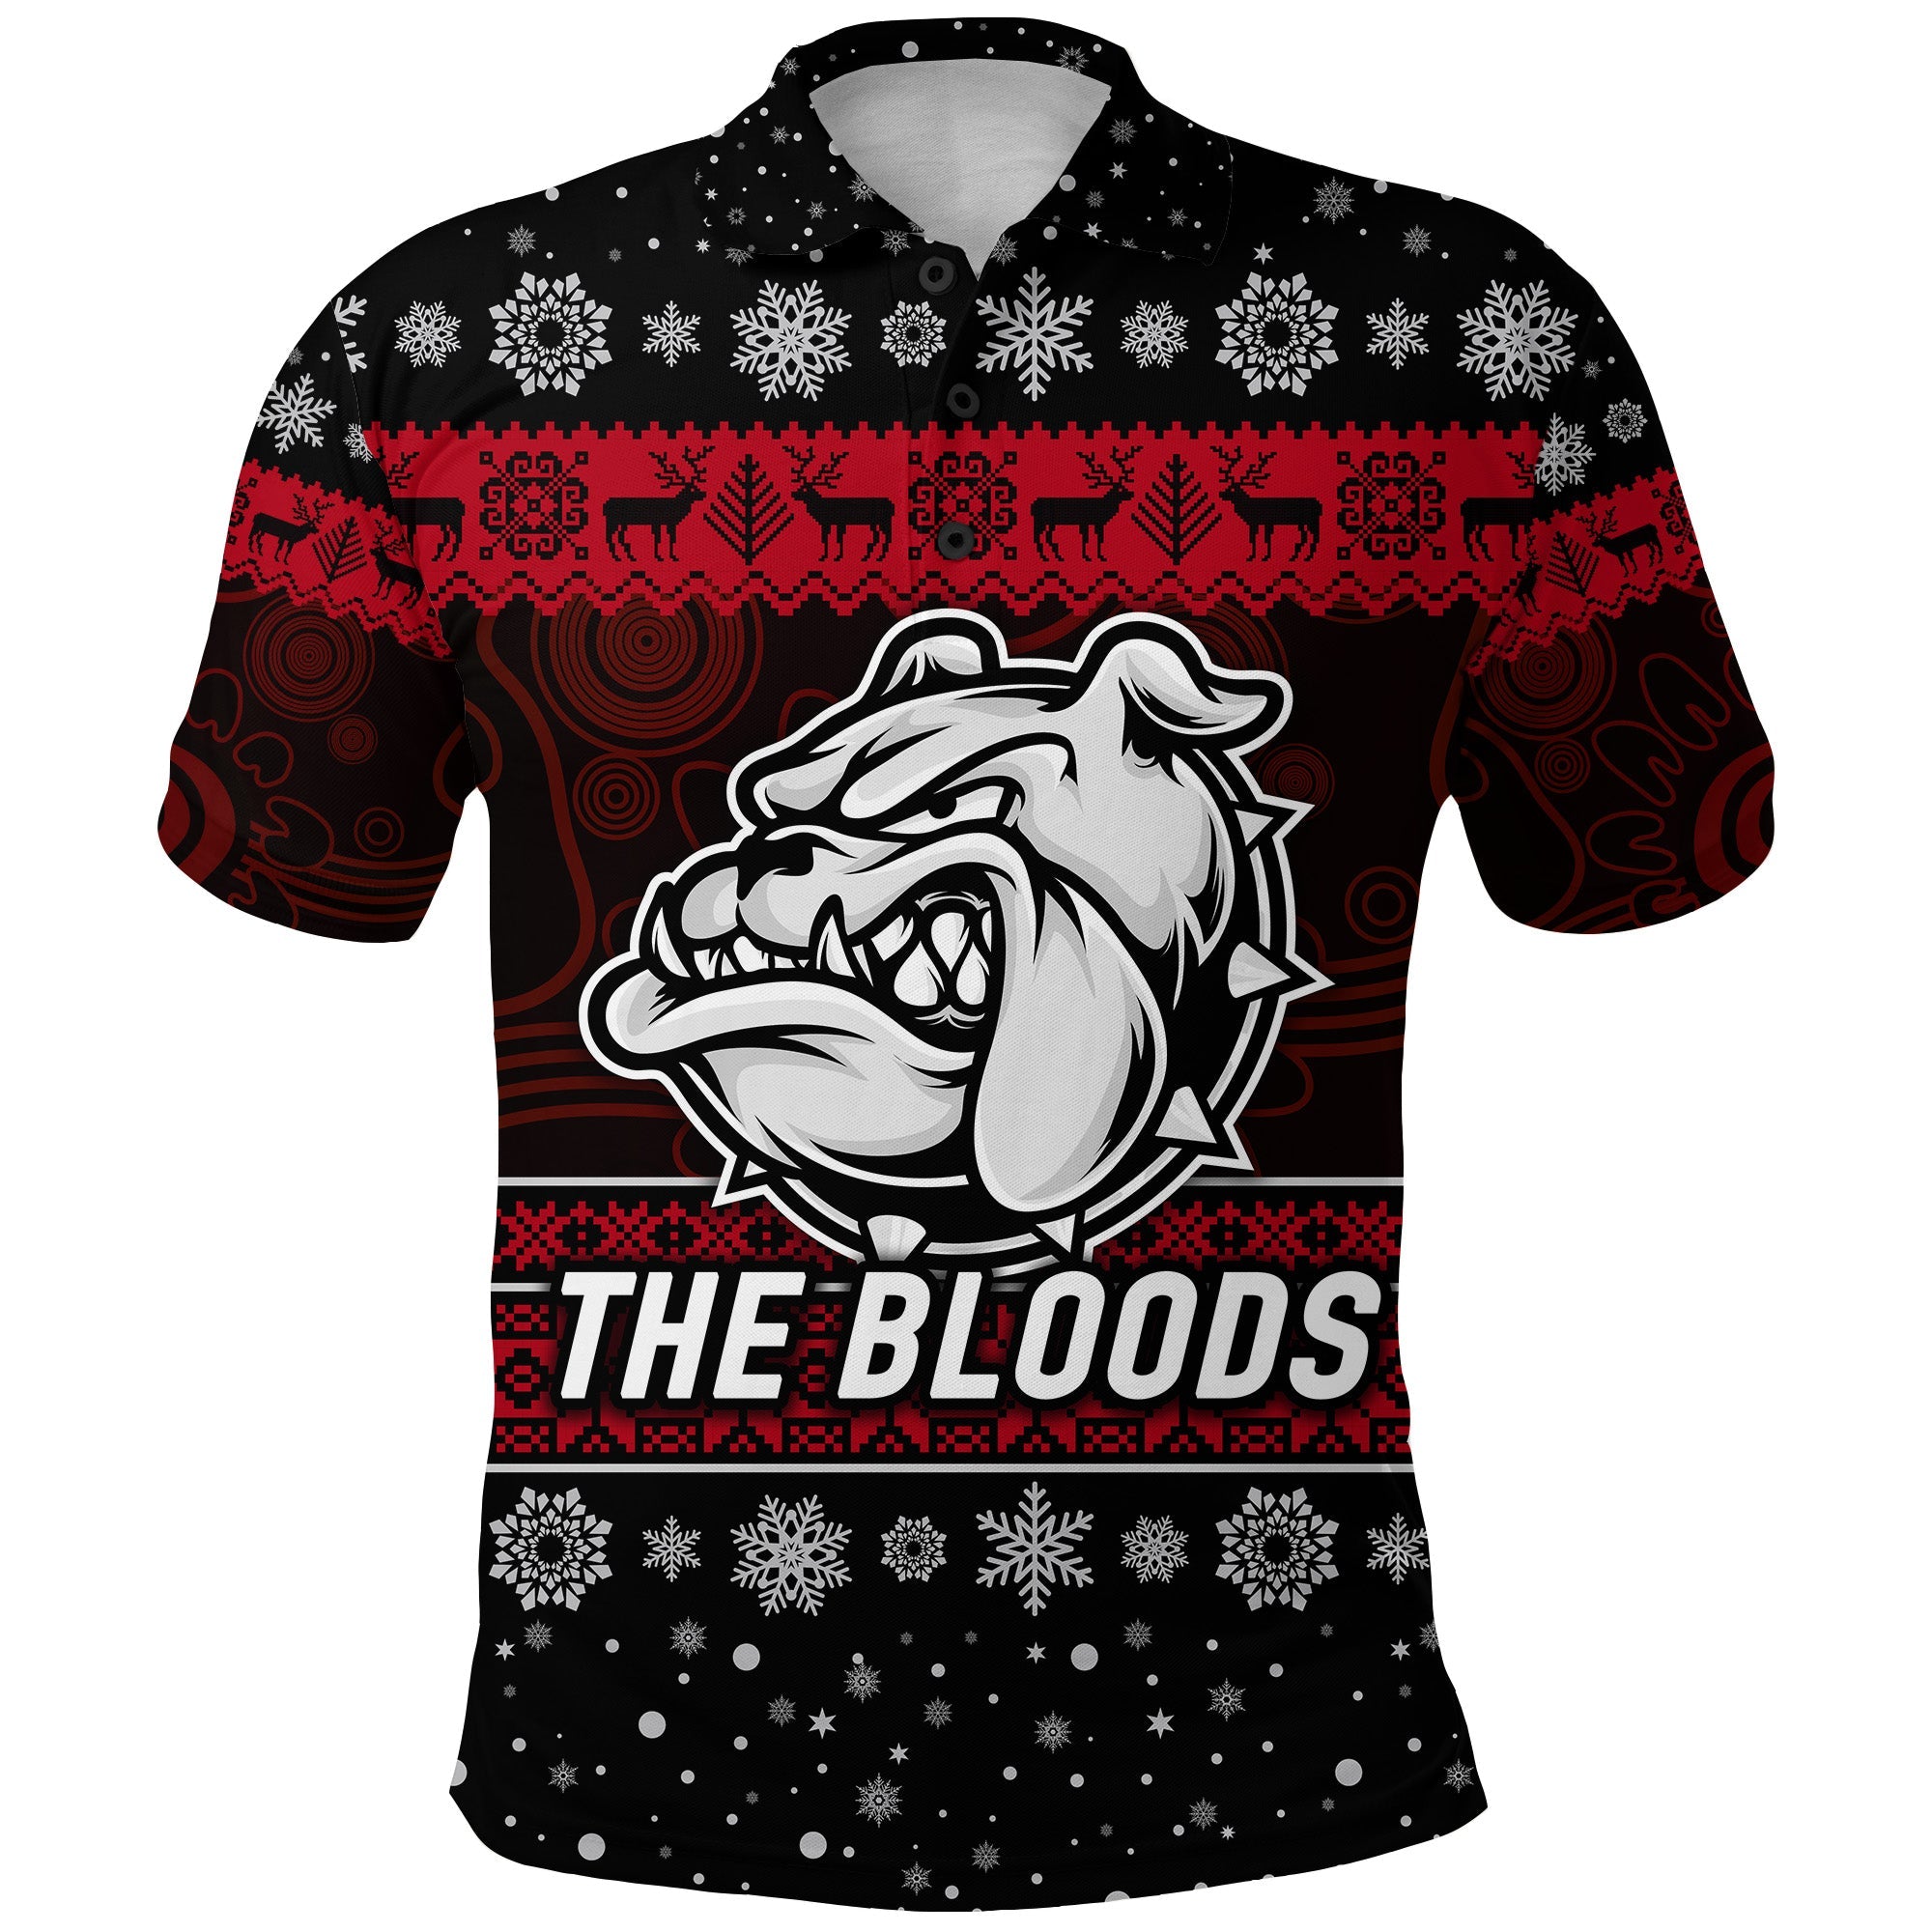 west-football-club-alice-springs-polo-shirt-christmas-the-bloods-simple-style-black